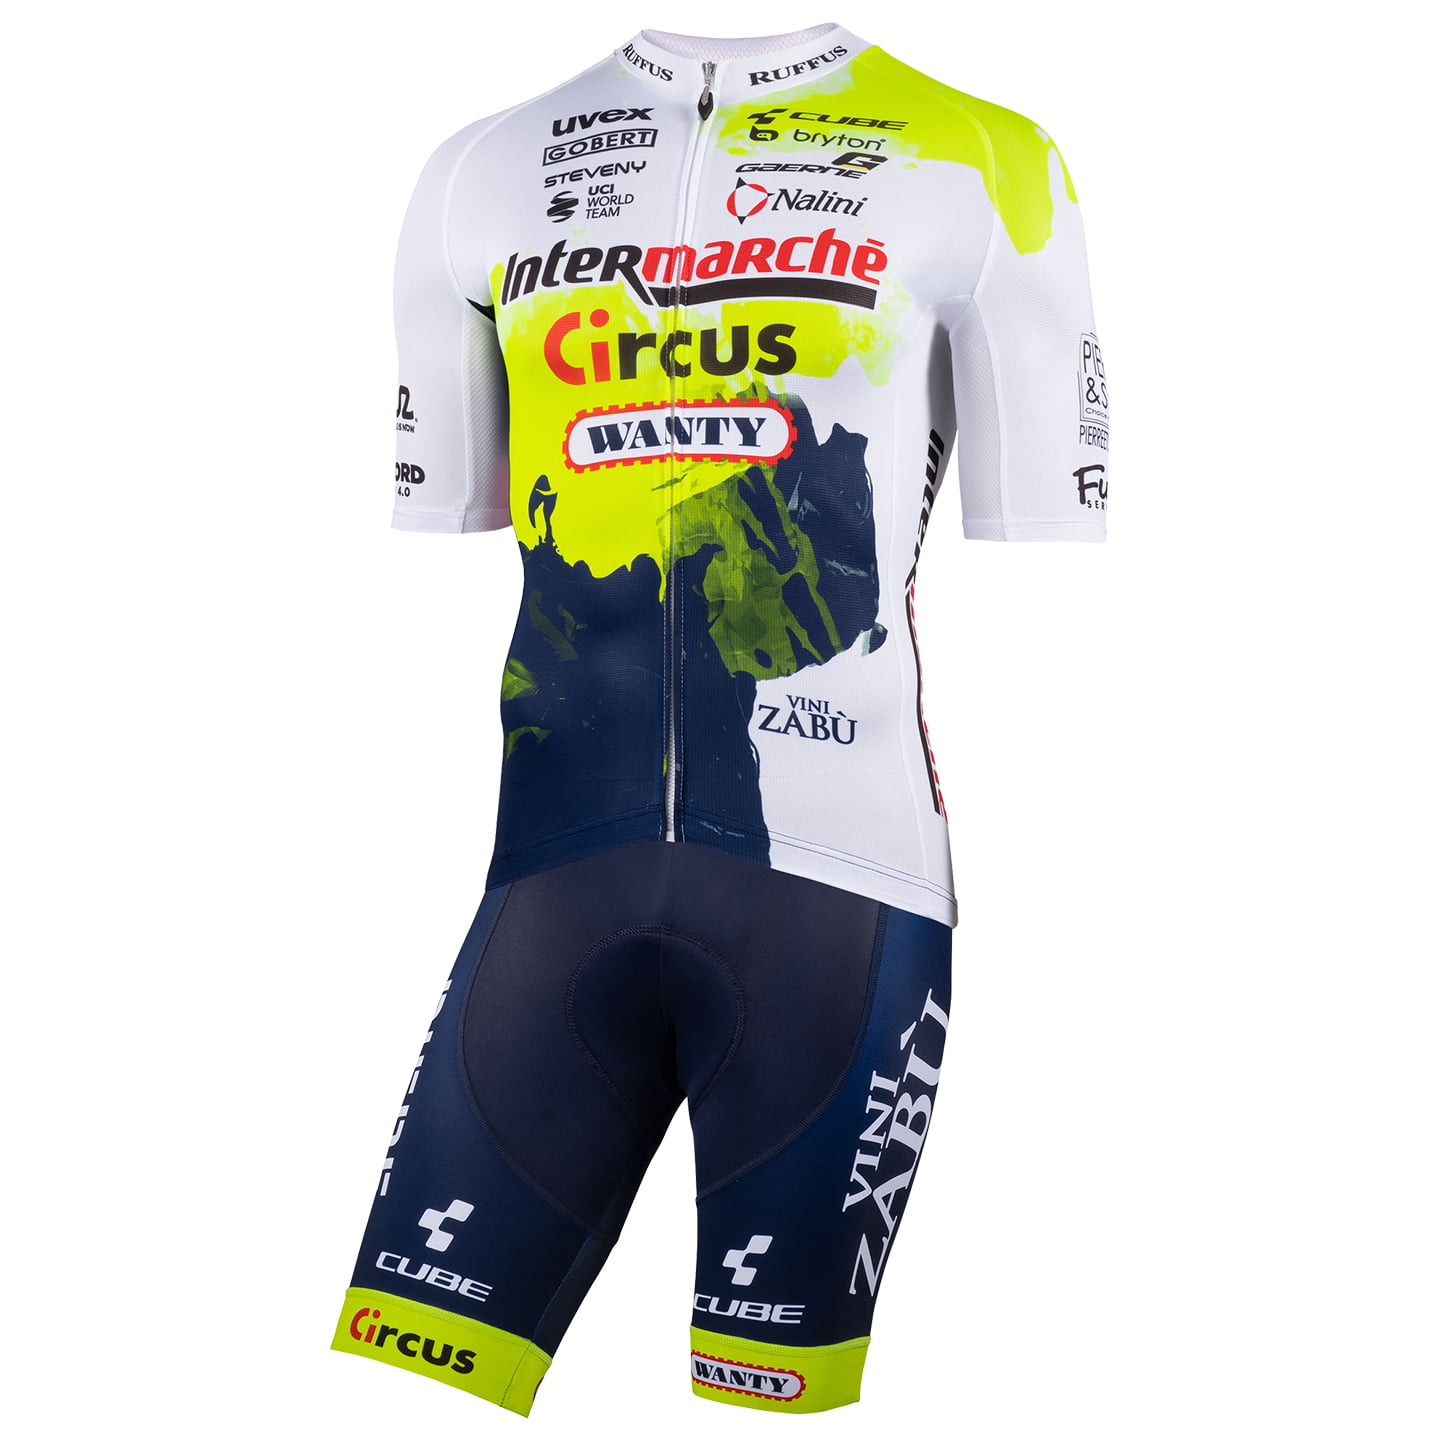 INTERMARCHE- CIRCUS-WANTY 2023 Set (cycling jersey + cycling shorts) Set (2 pieces), for men, Cycling clothing